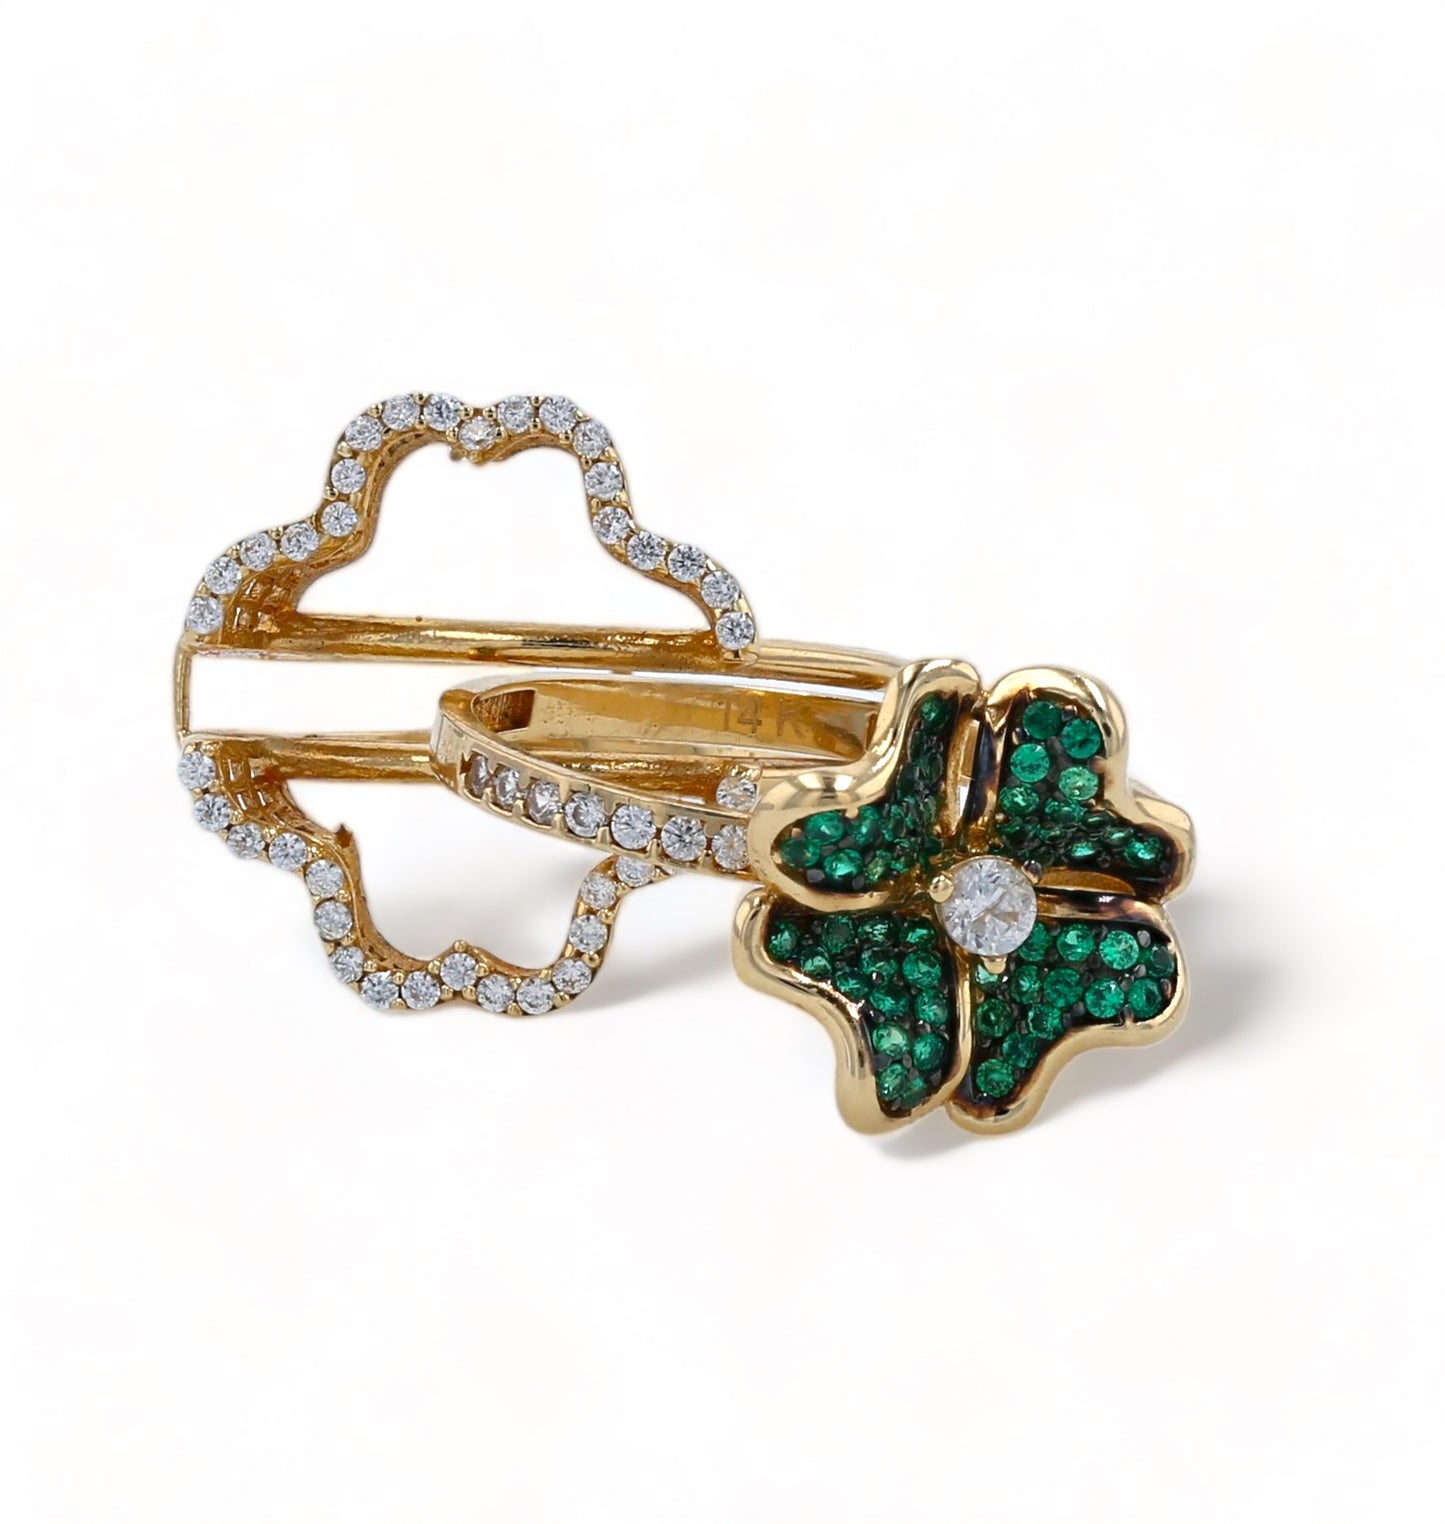 Gold 14k double clover ring